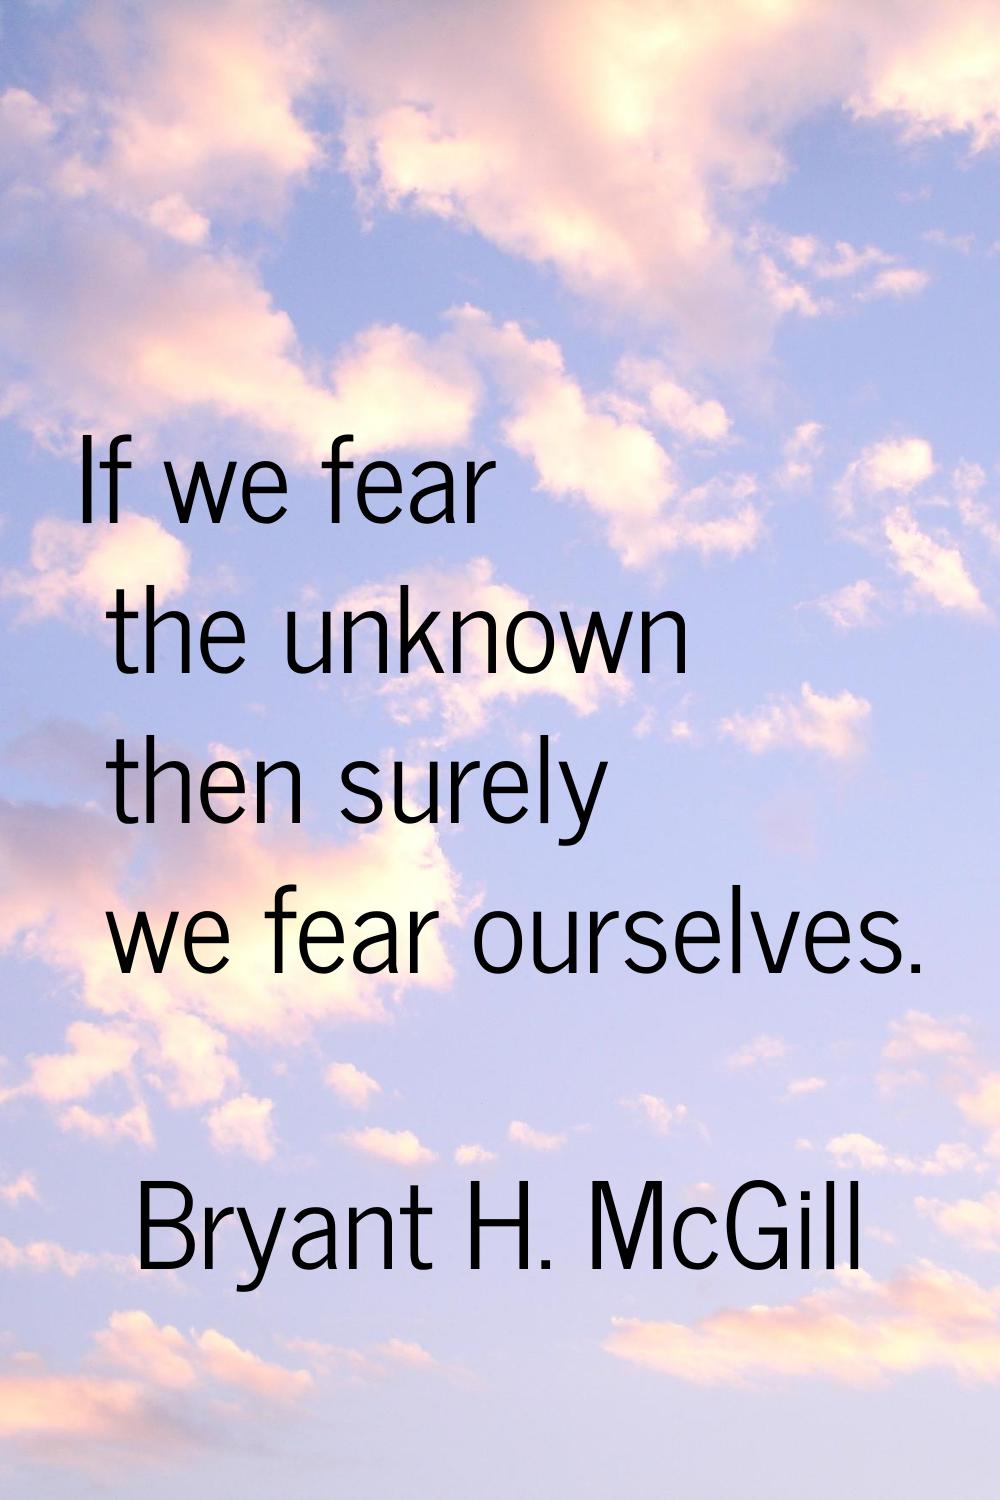 If we fear the unknown then surely we fear ourselves.